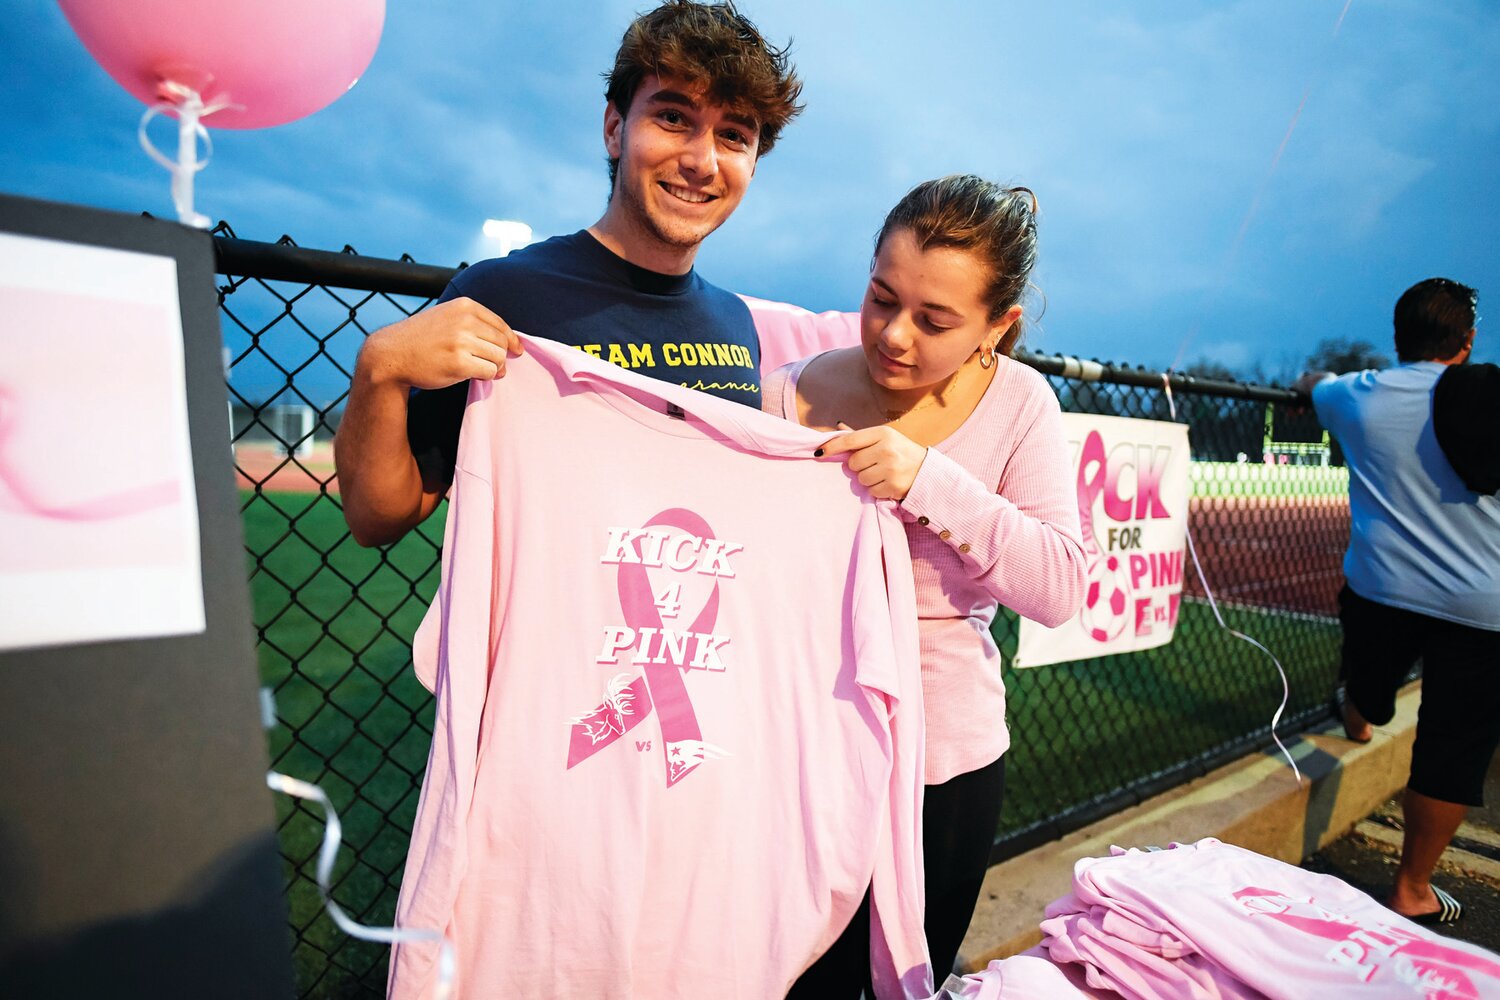 Michael Steitz and Rylee Decker, both from CB East, volunteered for the night to help with the shirt sales. Players from both schools wore the shirt before the start of both games in support of breast cancer awareness month.